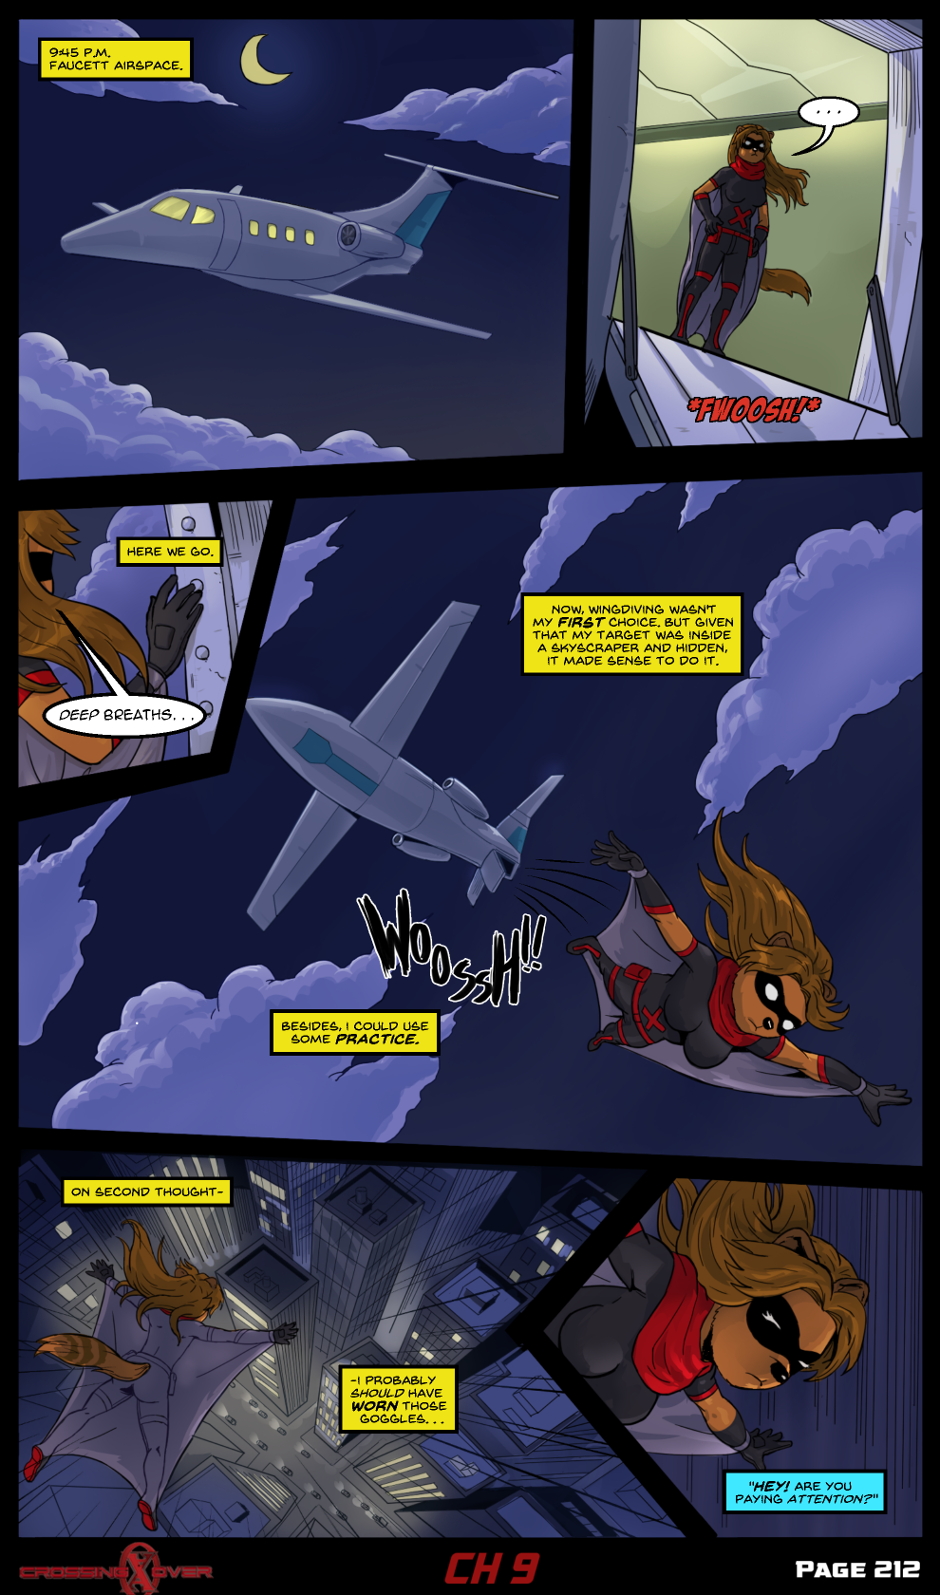 Page 212 (Ch 9)